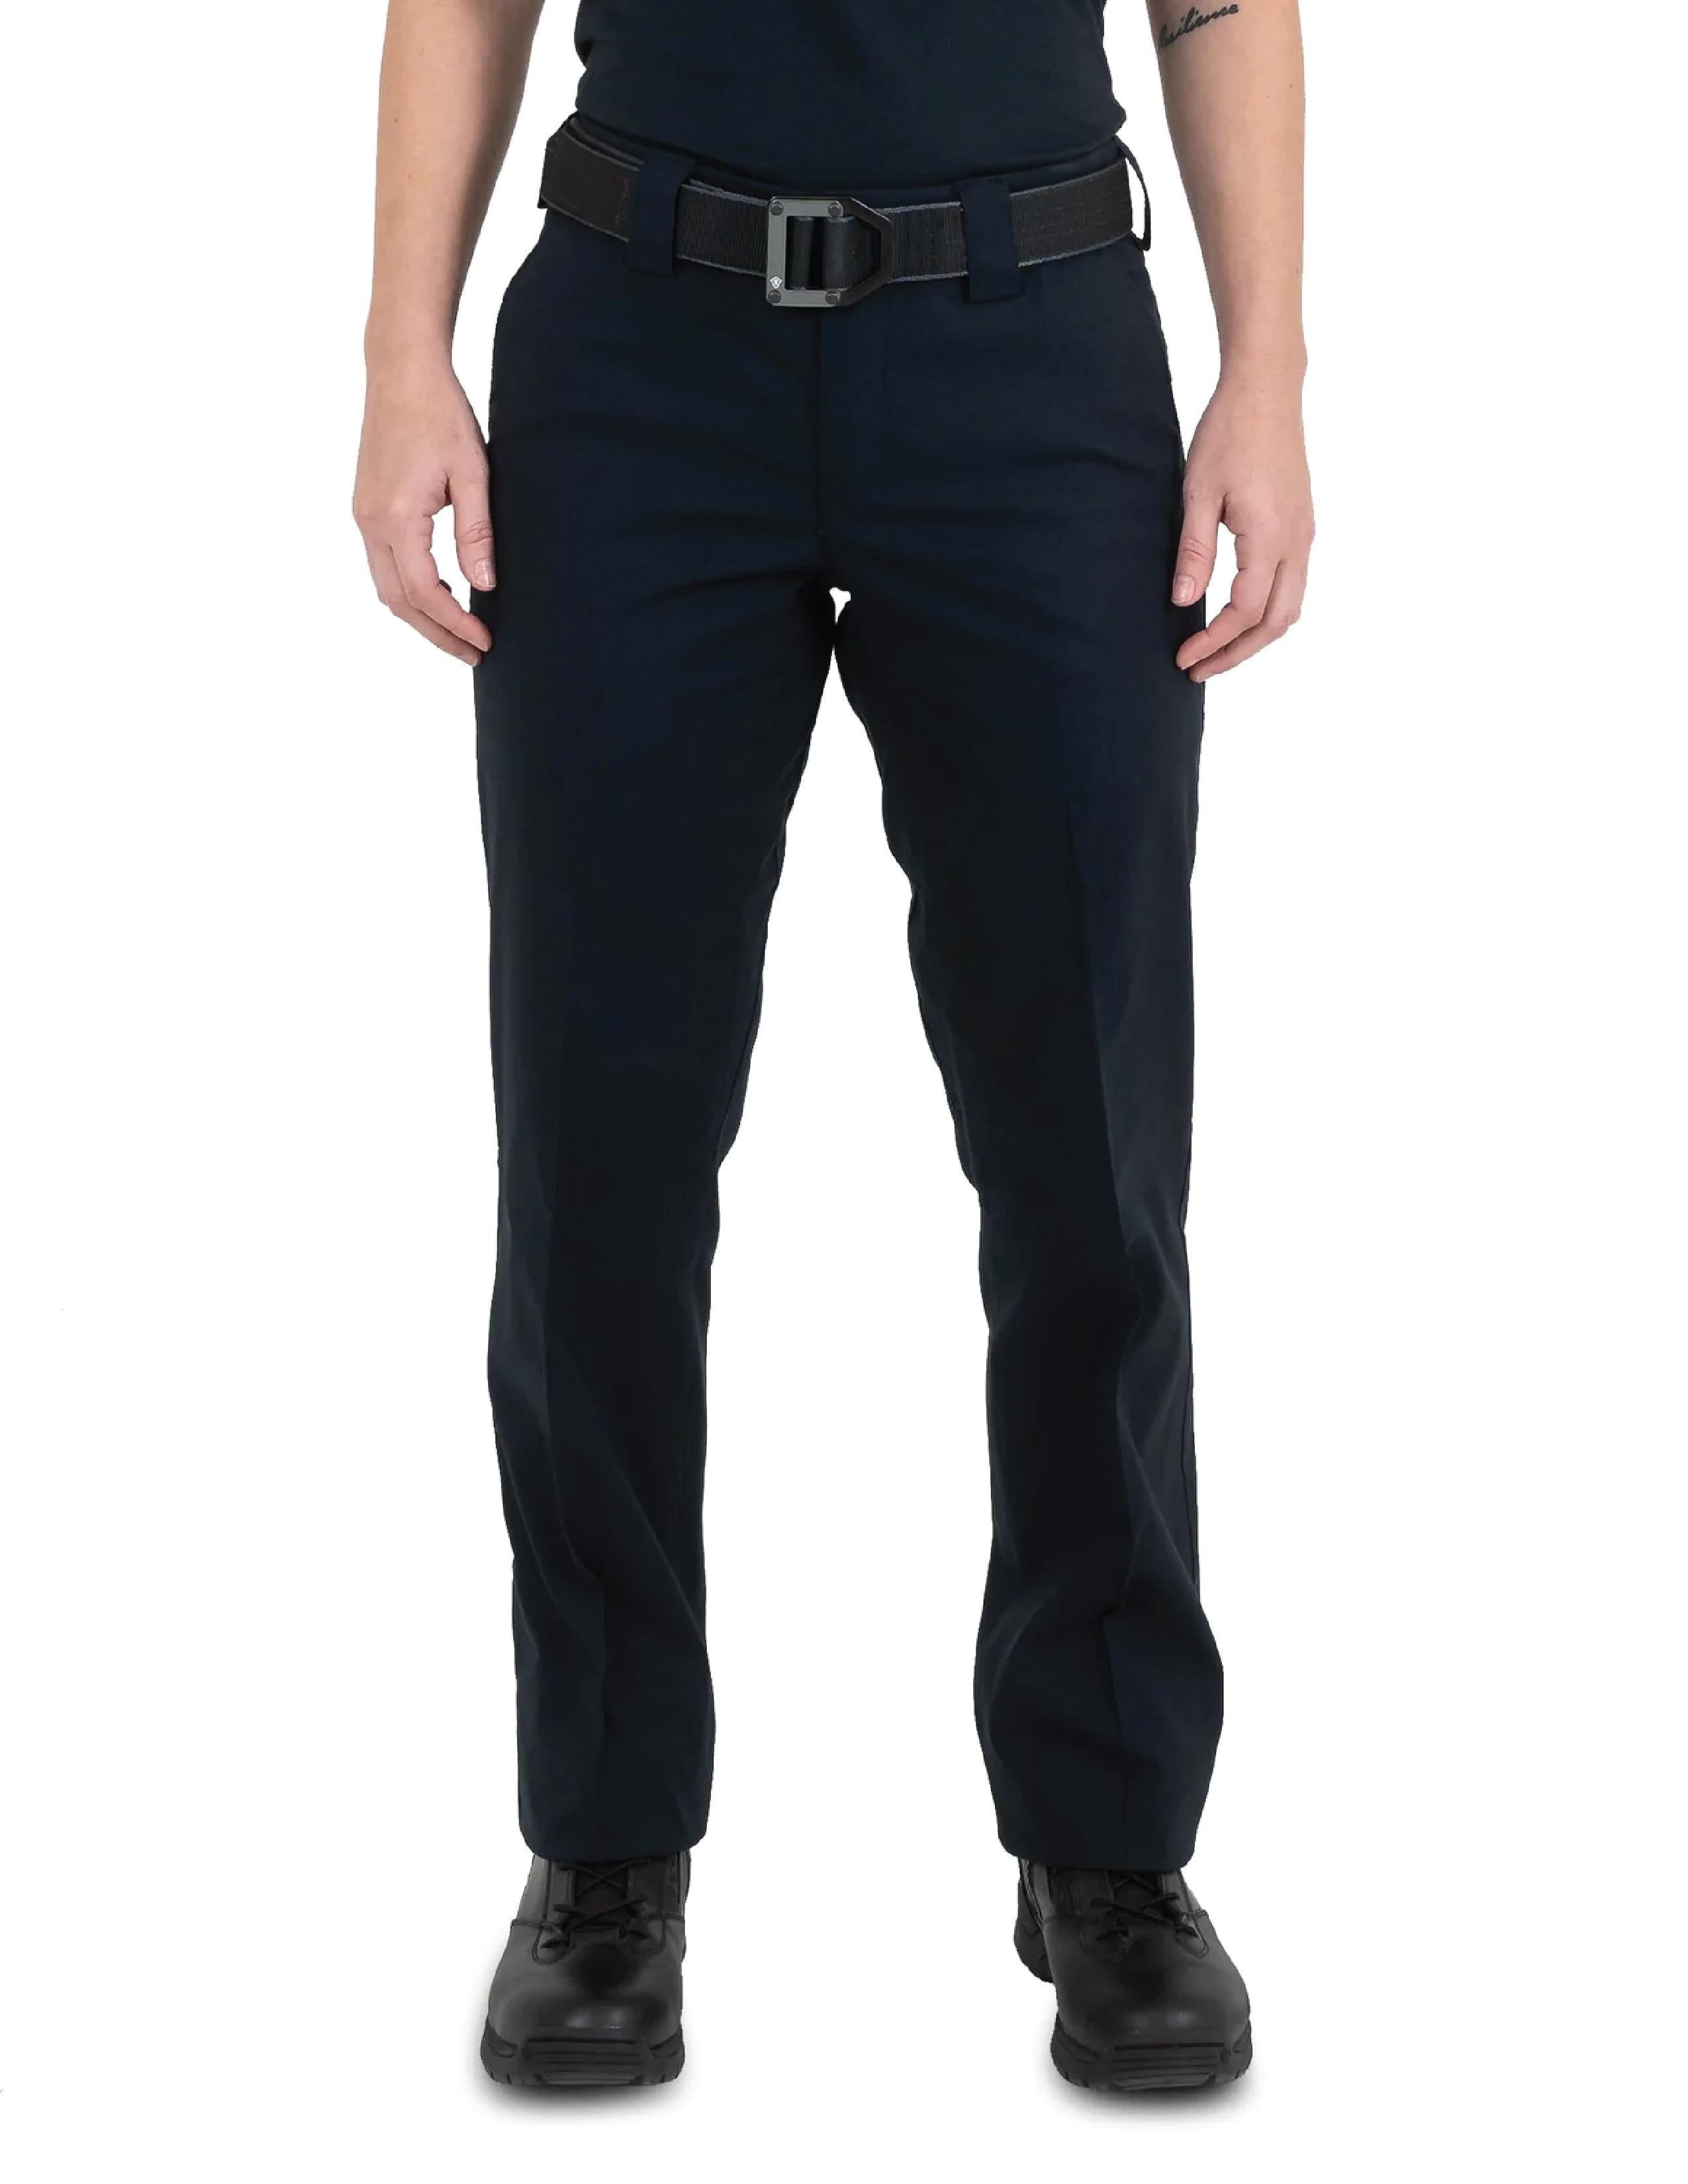 O) STYLE# 124018 WOMENS FIRST TACTICAL PRO DUTY UNIFORM PANTS